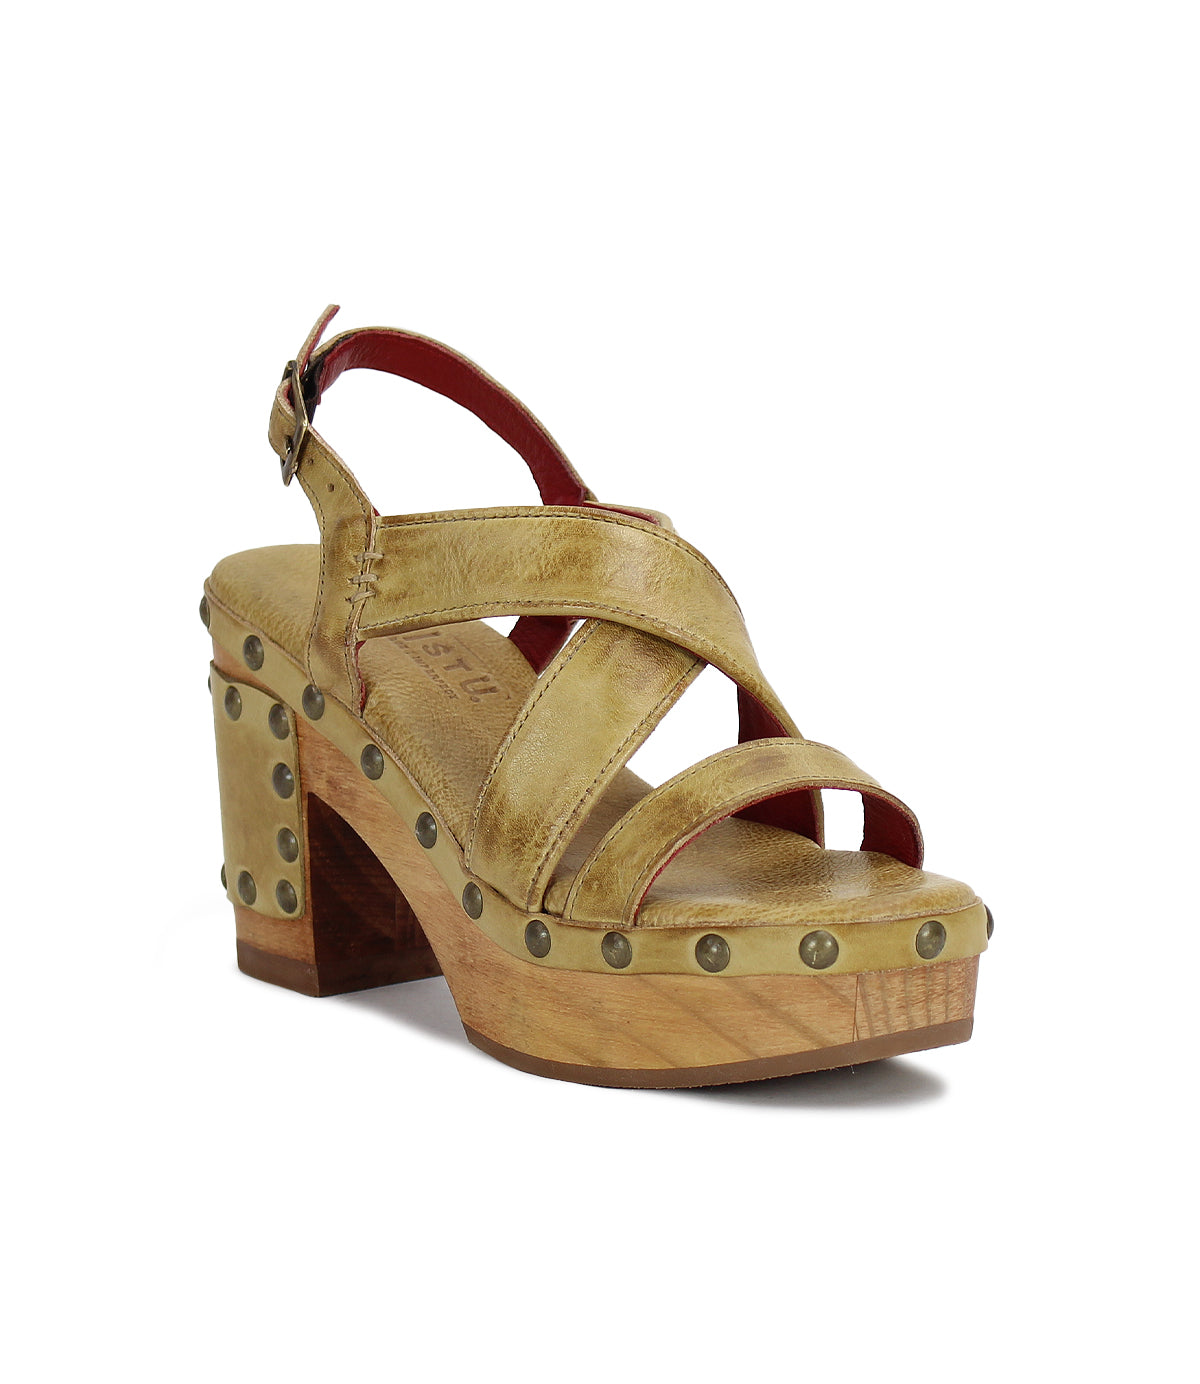 A comfortable yellow Bed Stu sandal with a red strap, perfect for Mediation.